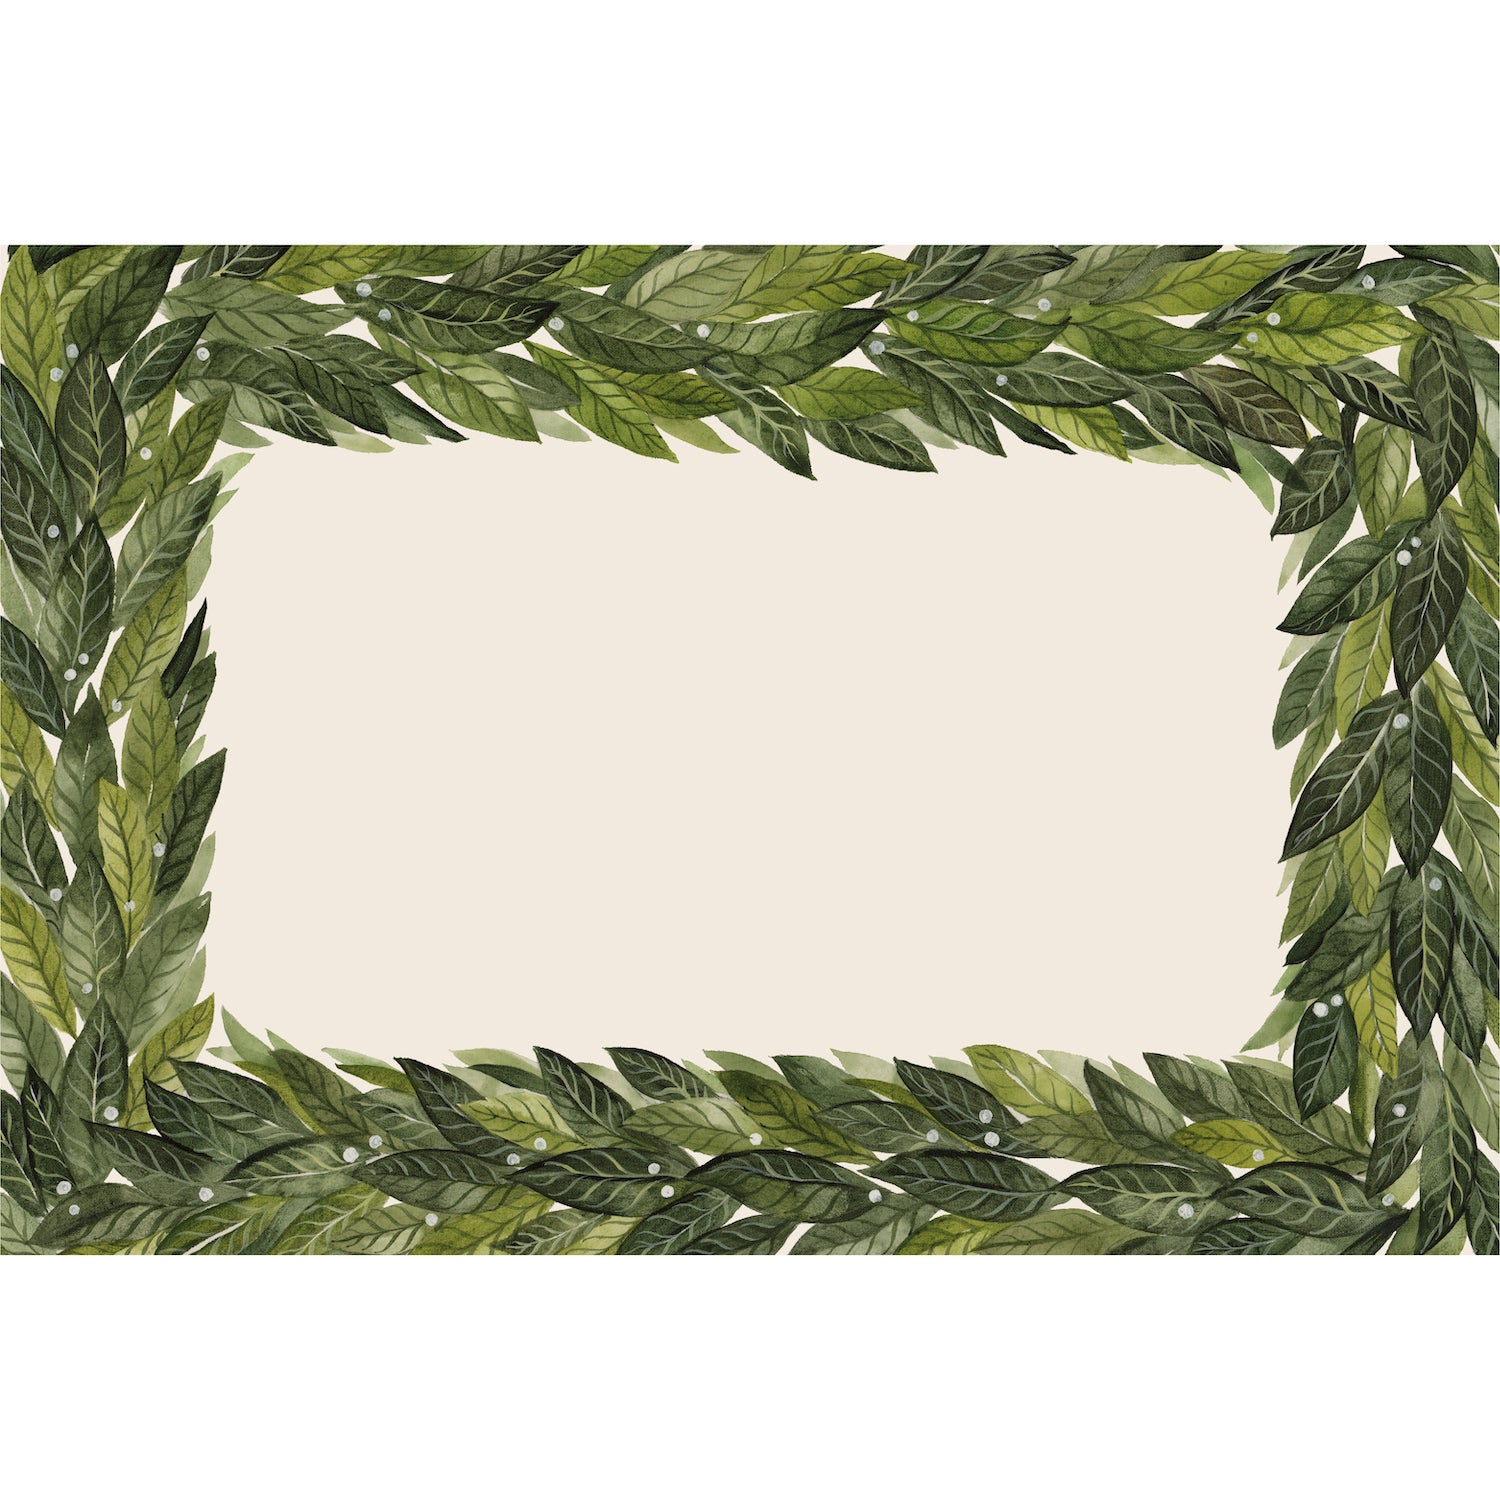 A Laurel Placemat adorned with green leaves on a white background, perfect for weddings or with gold accessories. The Hester &amp; Cook Laurel Placemat.